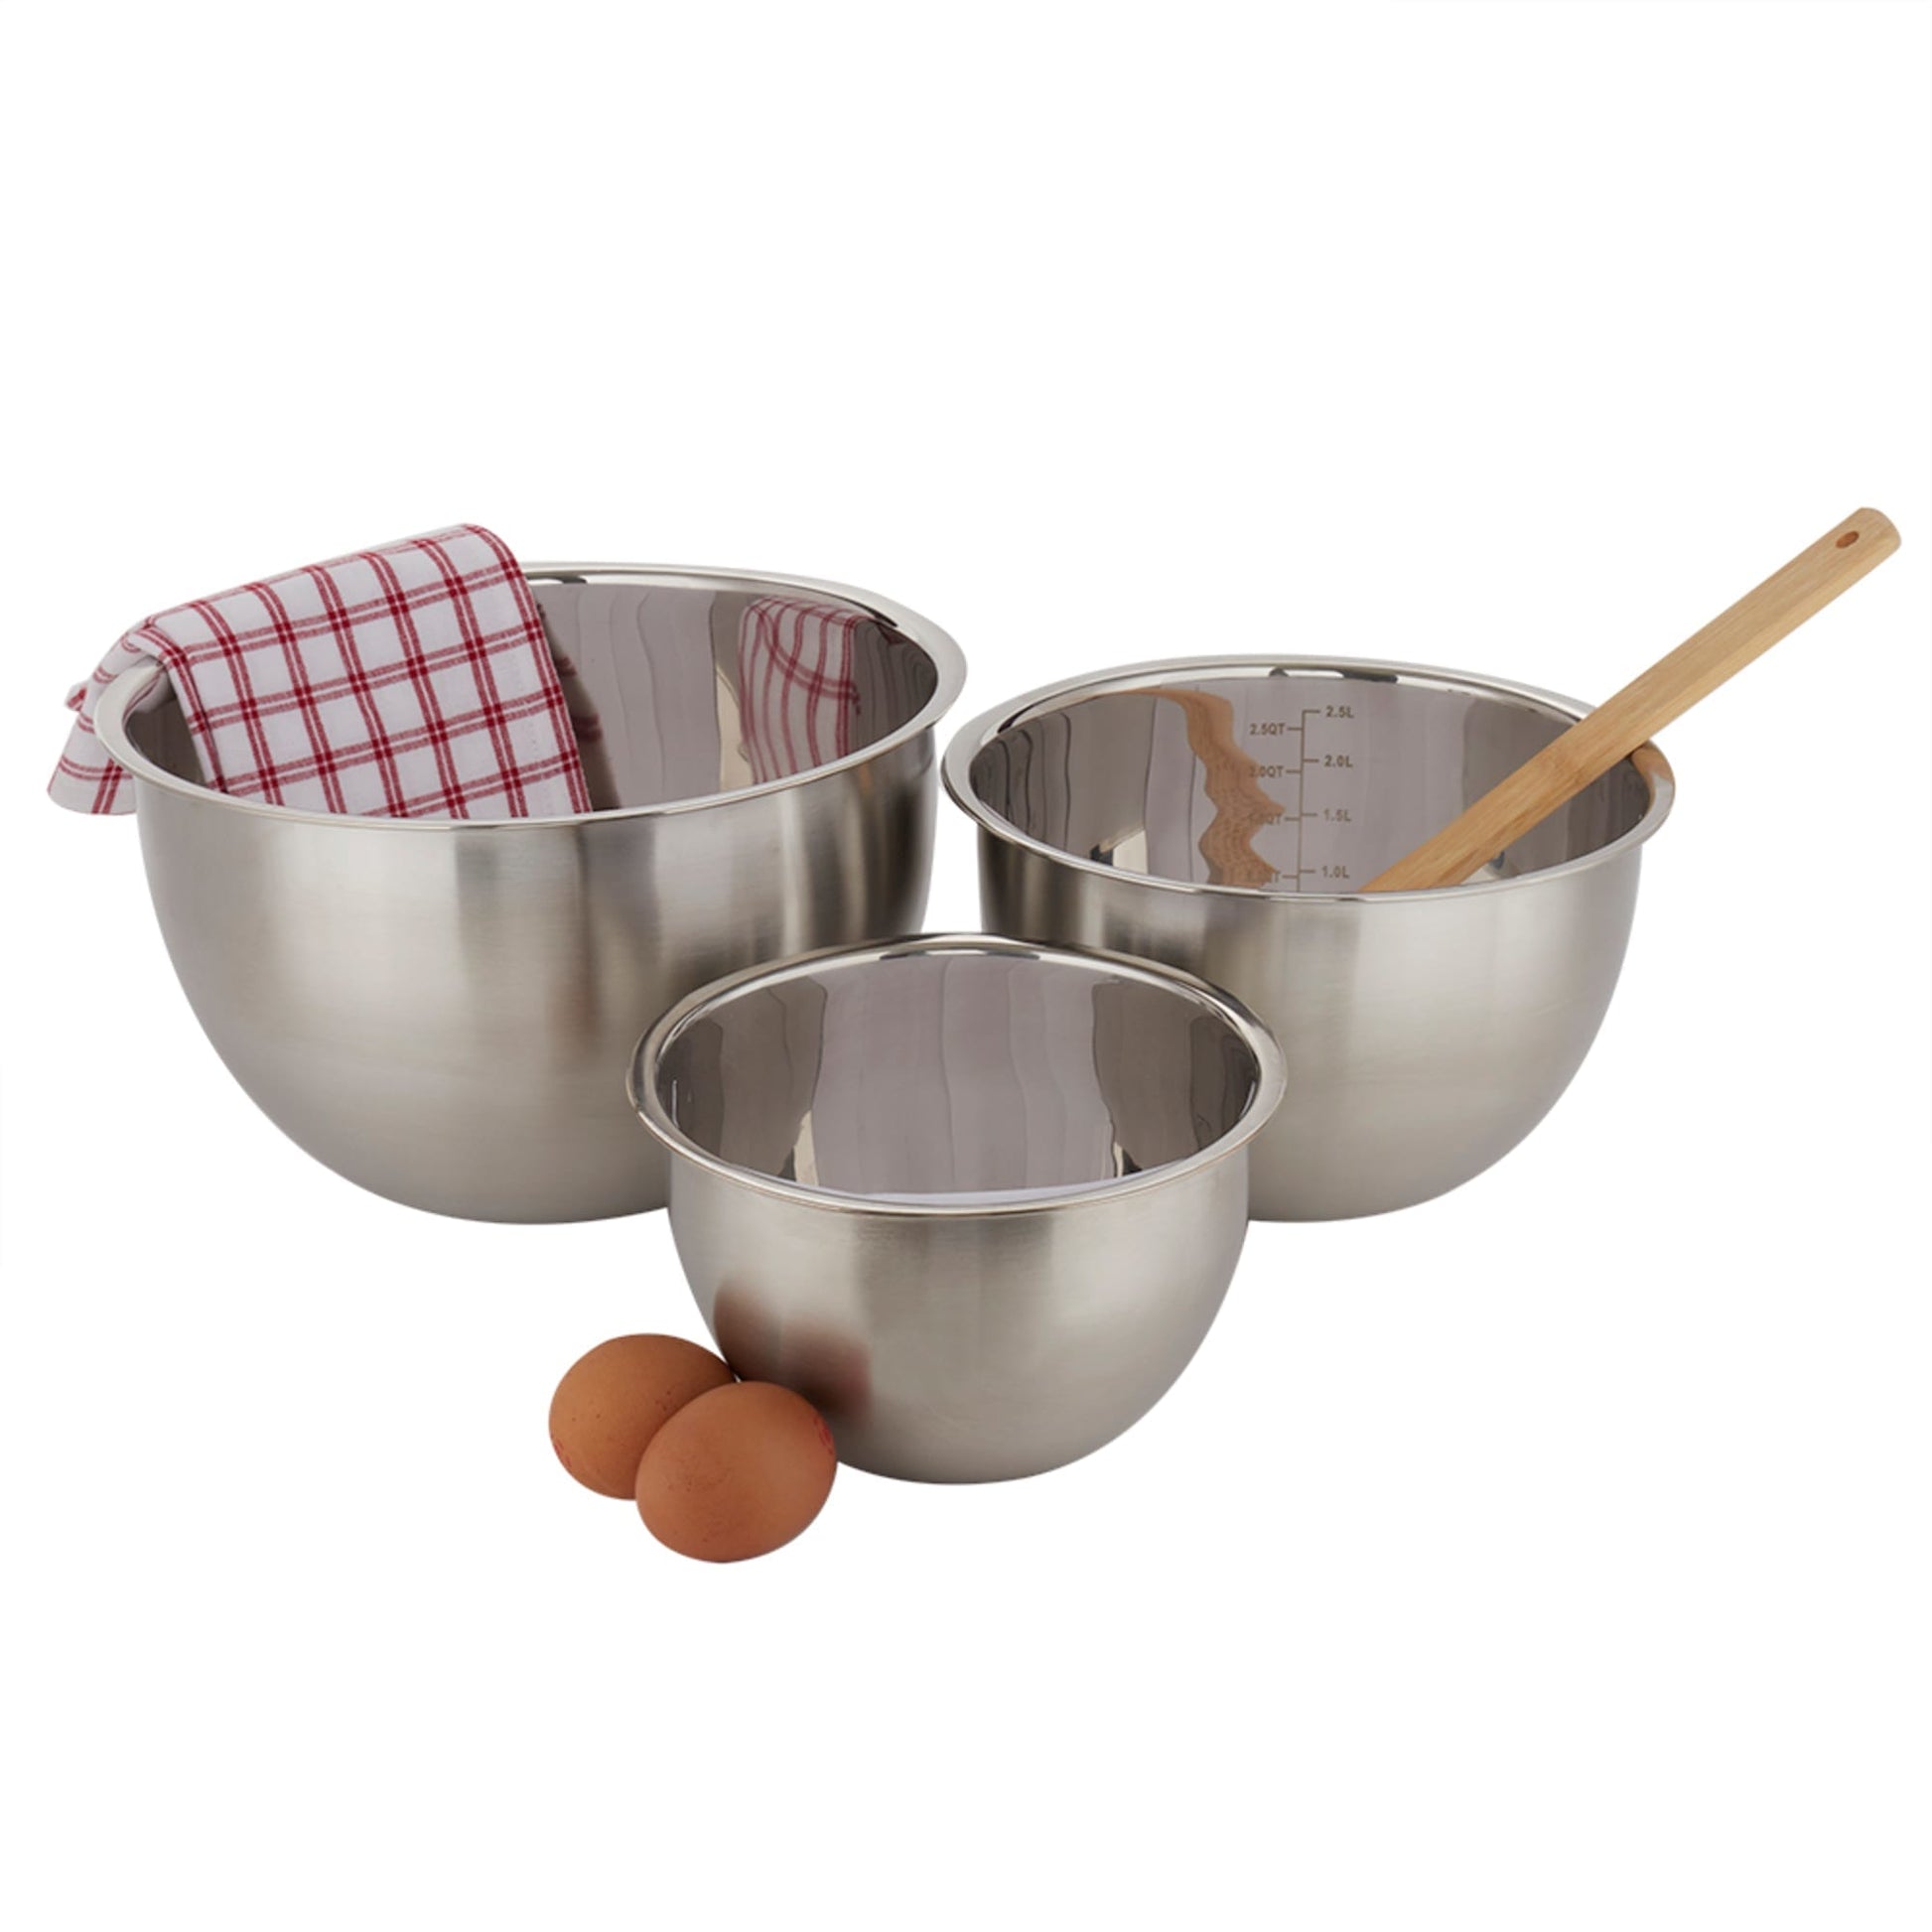 5pcs Non-Slip Stainless Steel Mixing Bowls Set - Perfect for Kitchen Cooking  and Baking - Nesting Design for Easy Storage